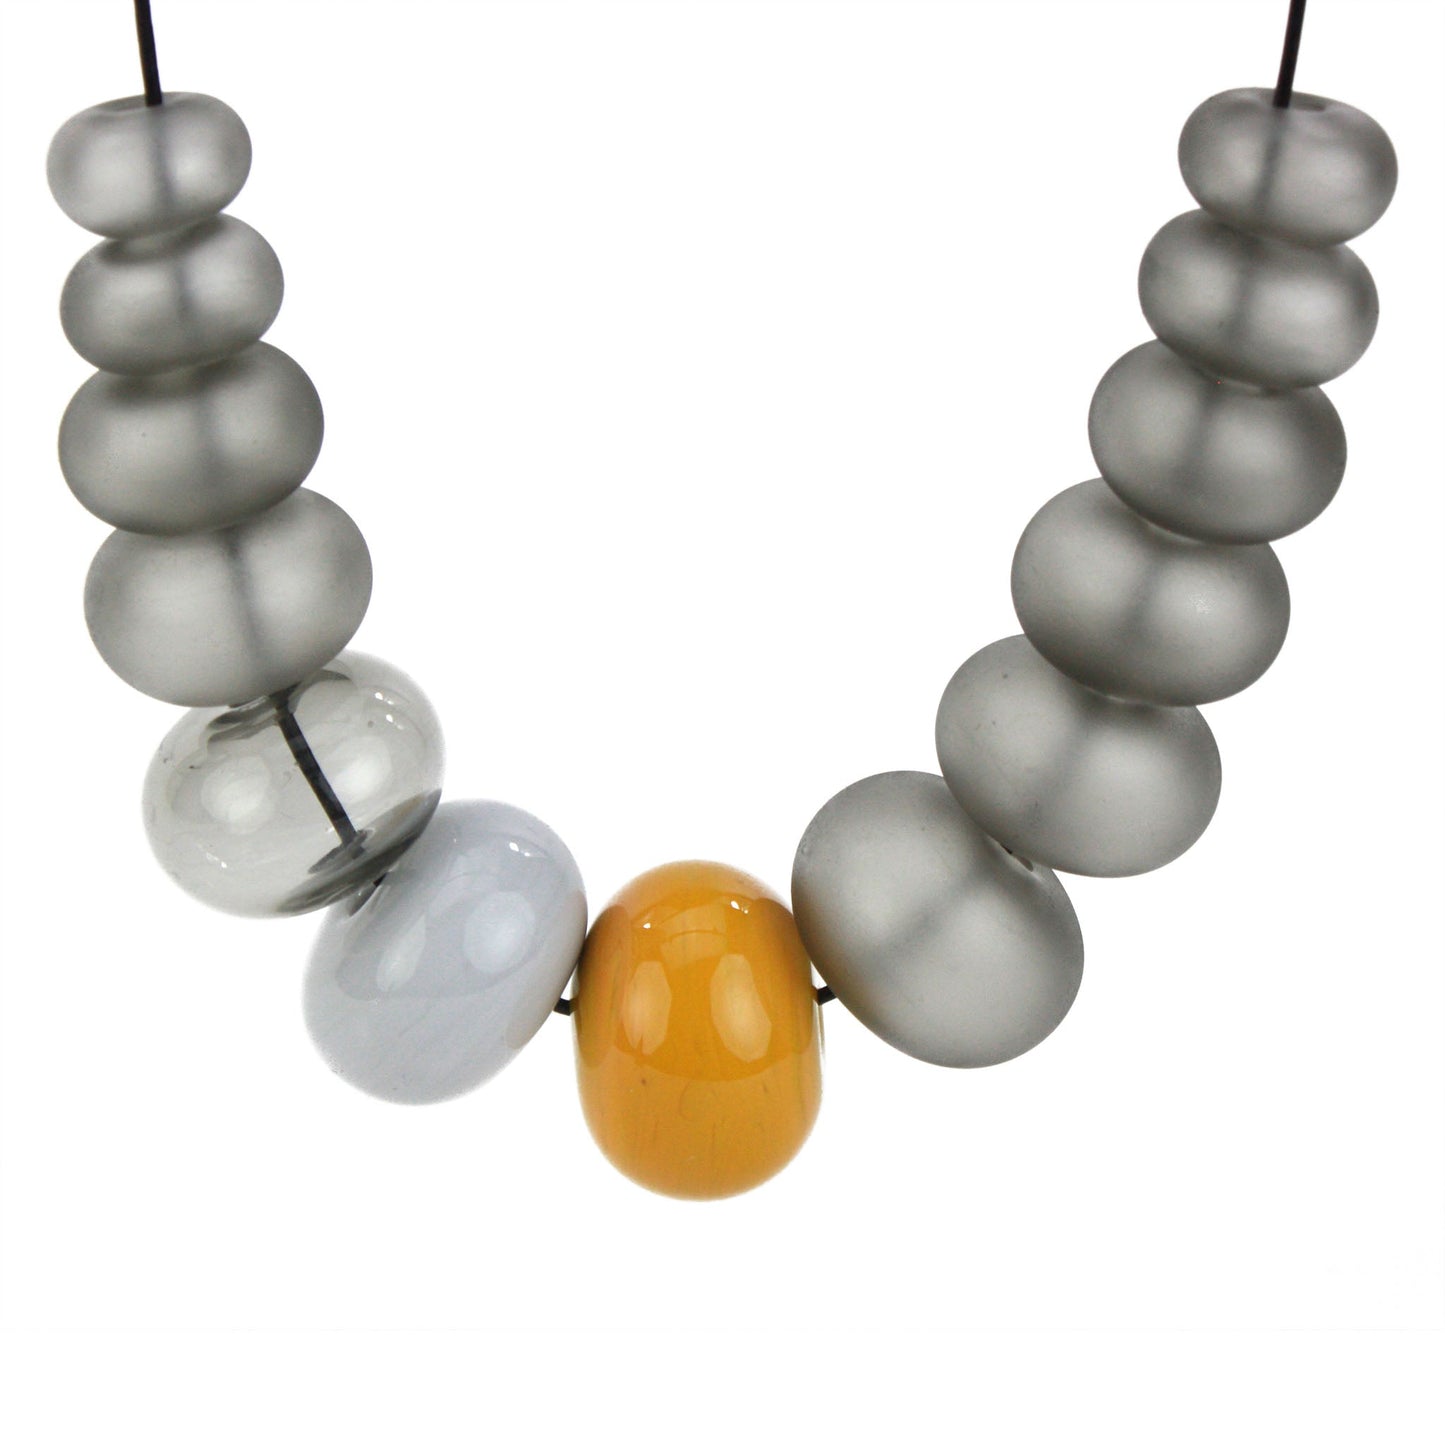 13 Bead Bubble Necklace -grey, yellow and dove grey